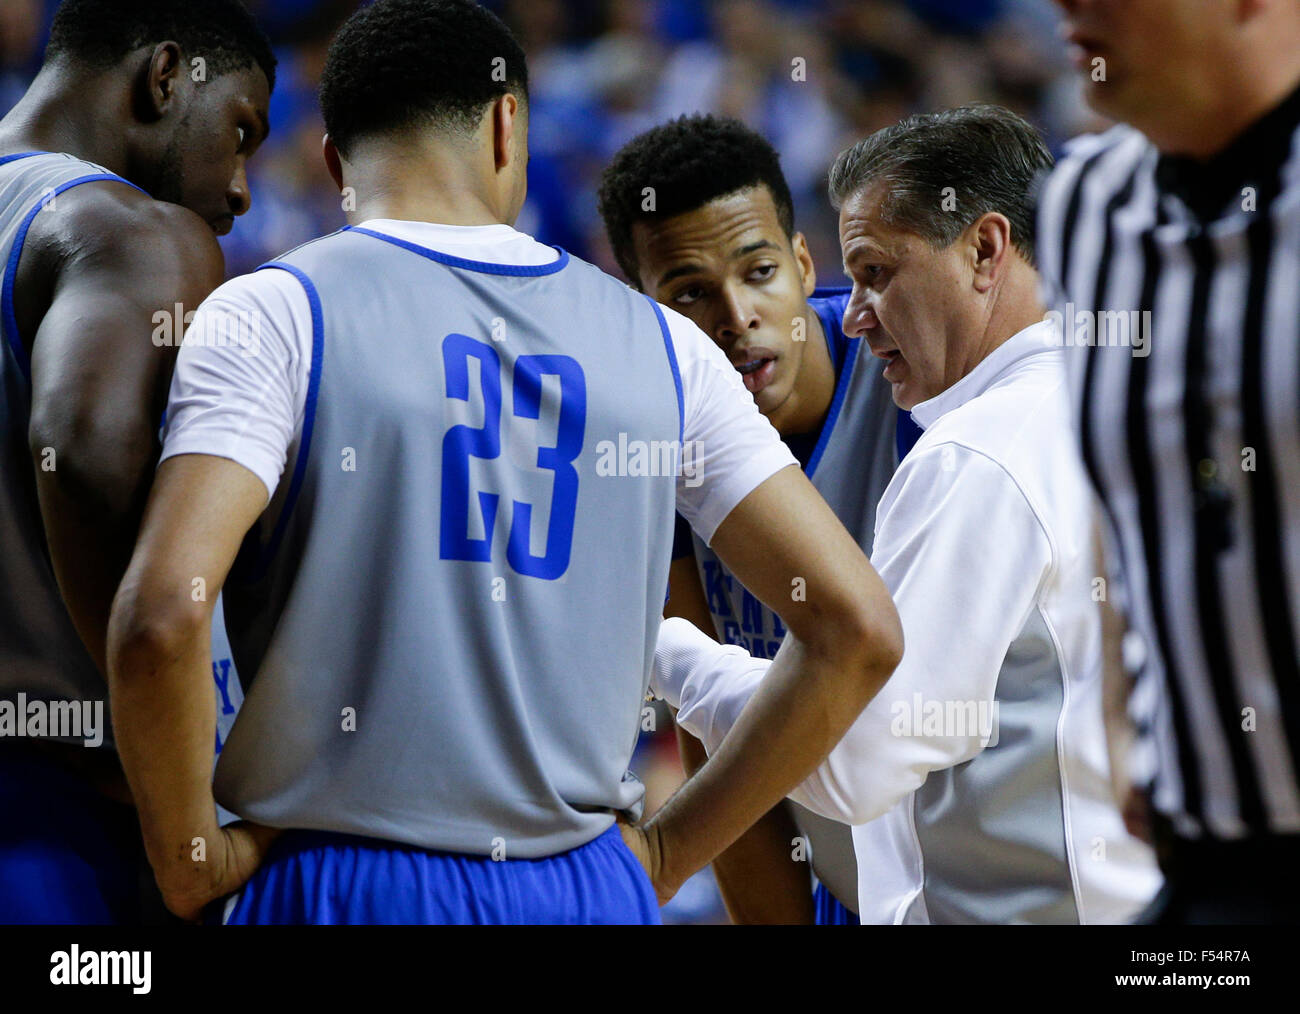 Lexington, Kentucky, USA. 13th Oct, 2015. Kentucky Wildcats head coach John Calipari talked to his team in the huddle during the Blue-White game on Tuesday October 27, 2015 in Lexington, KY. Photo by Mark Cornelison | Staff © Lexington Herald-Leader/ZUMA Wire/Alamy Live News Stock Photo